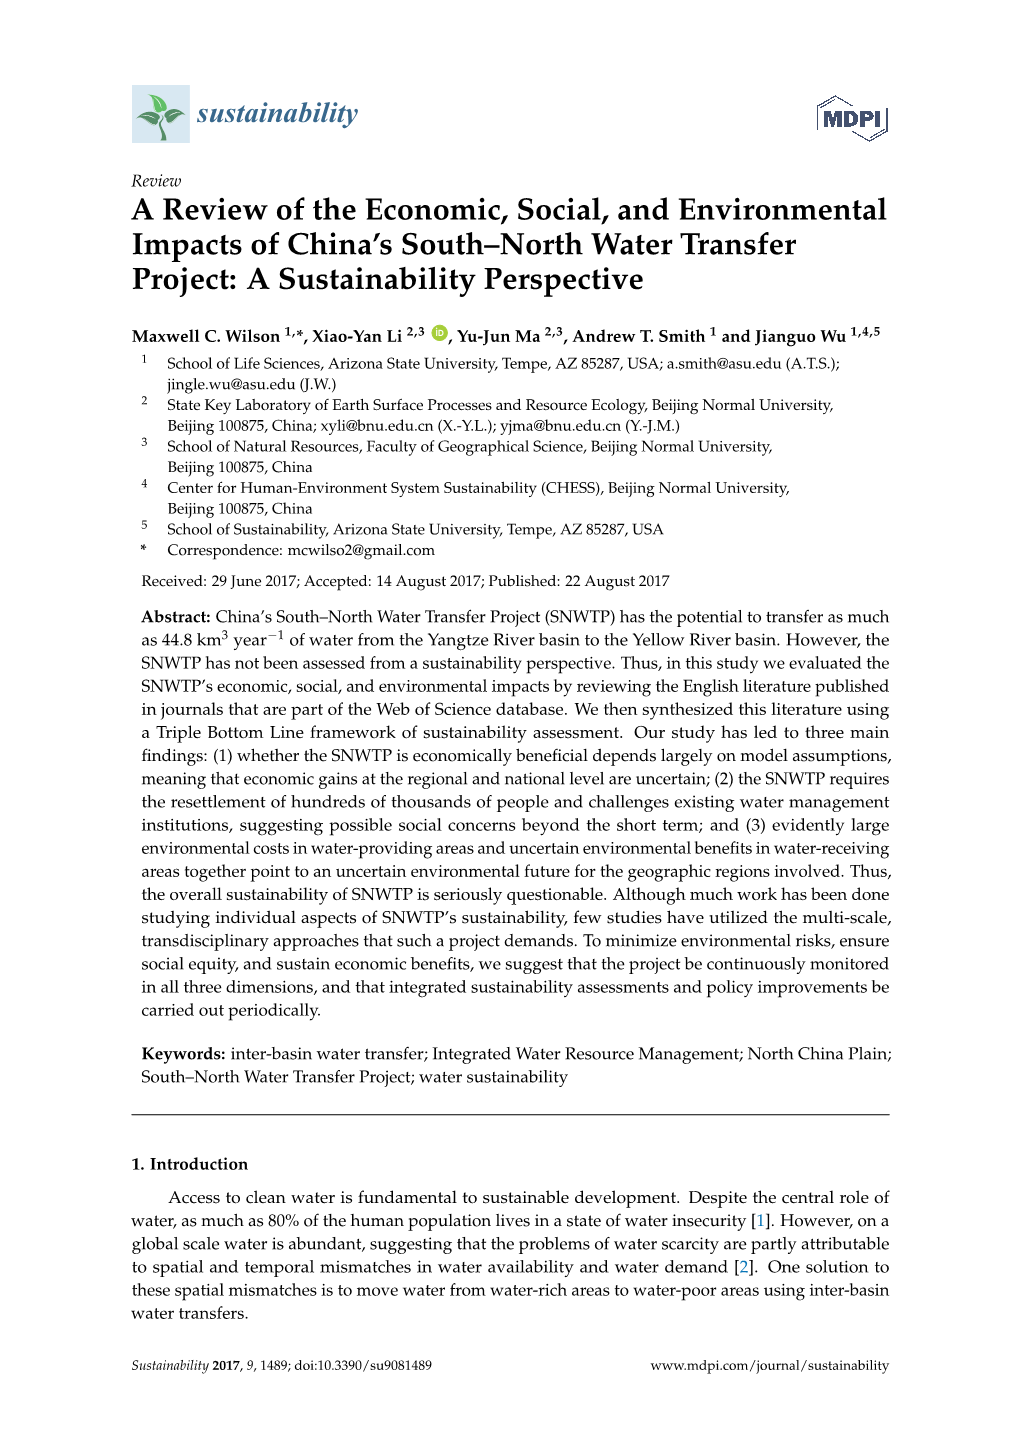 A Review of the Economic, Social, and Environmental Impacts of China's